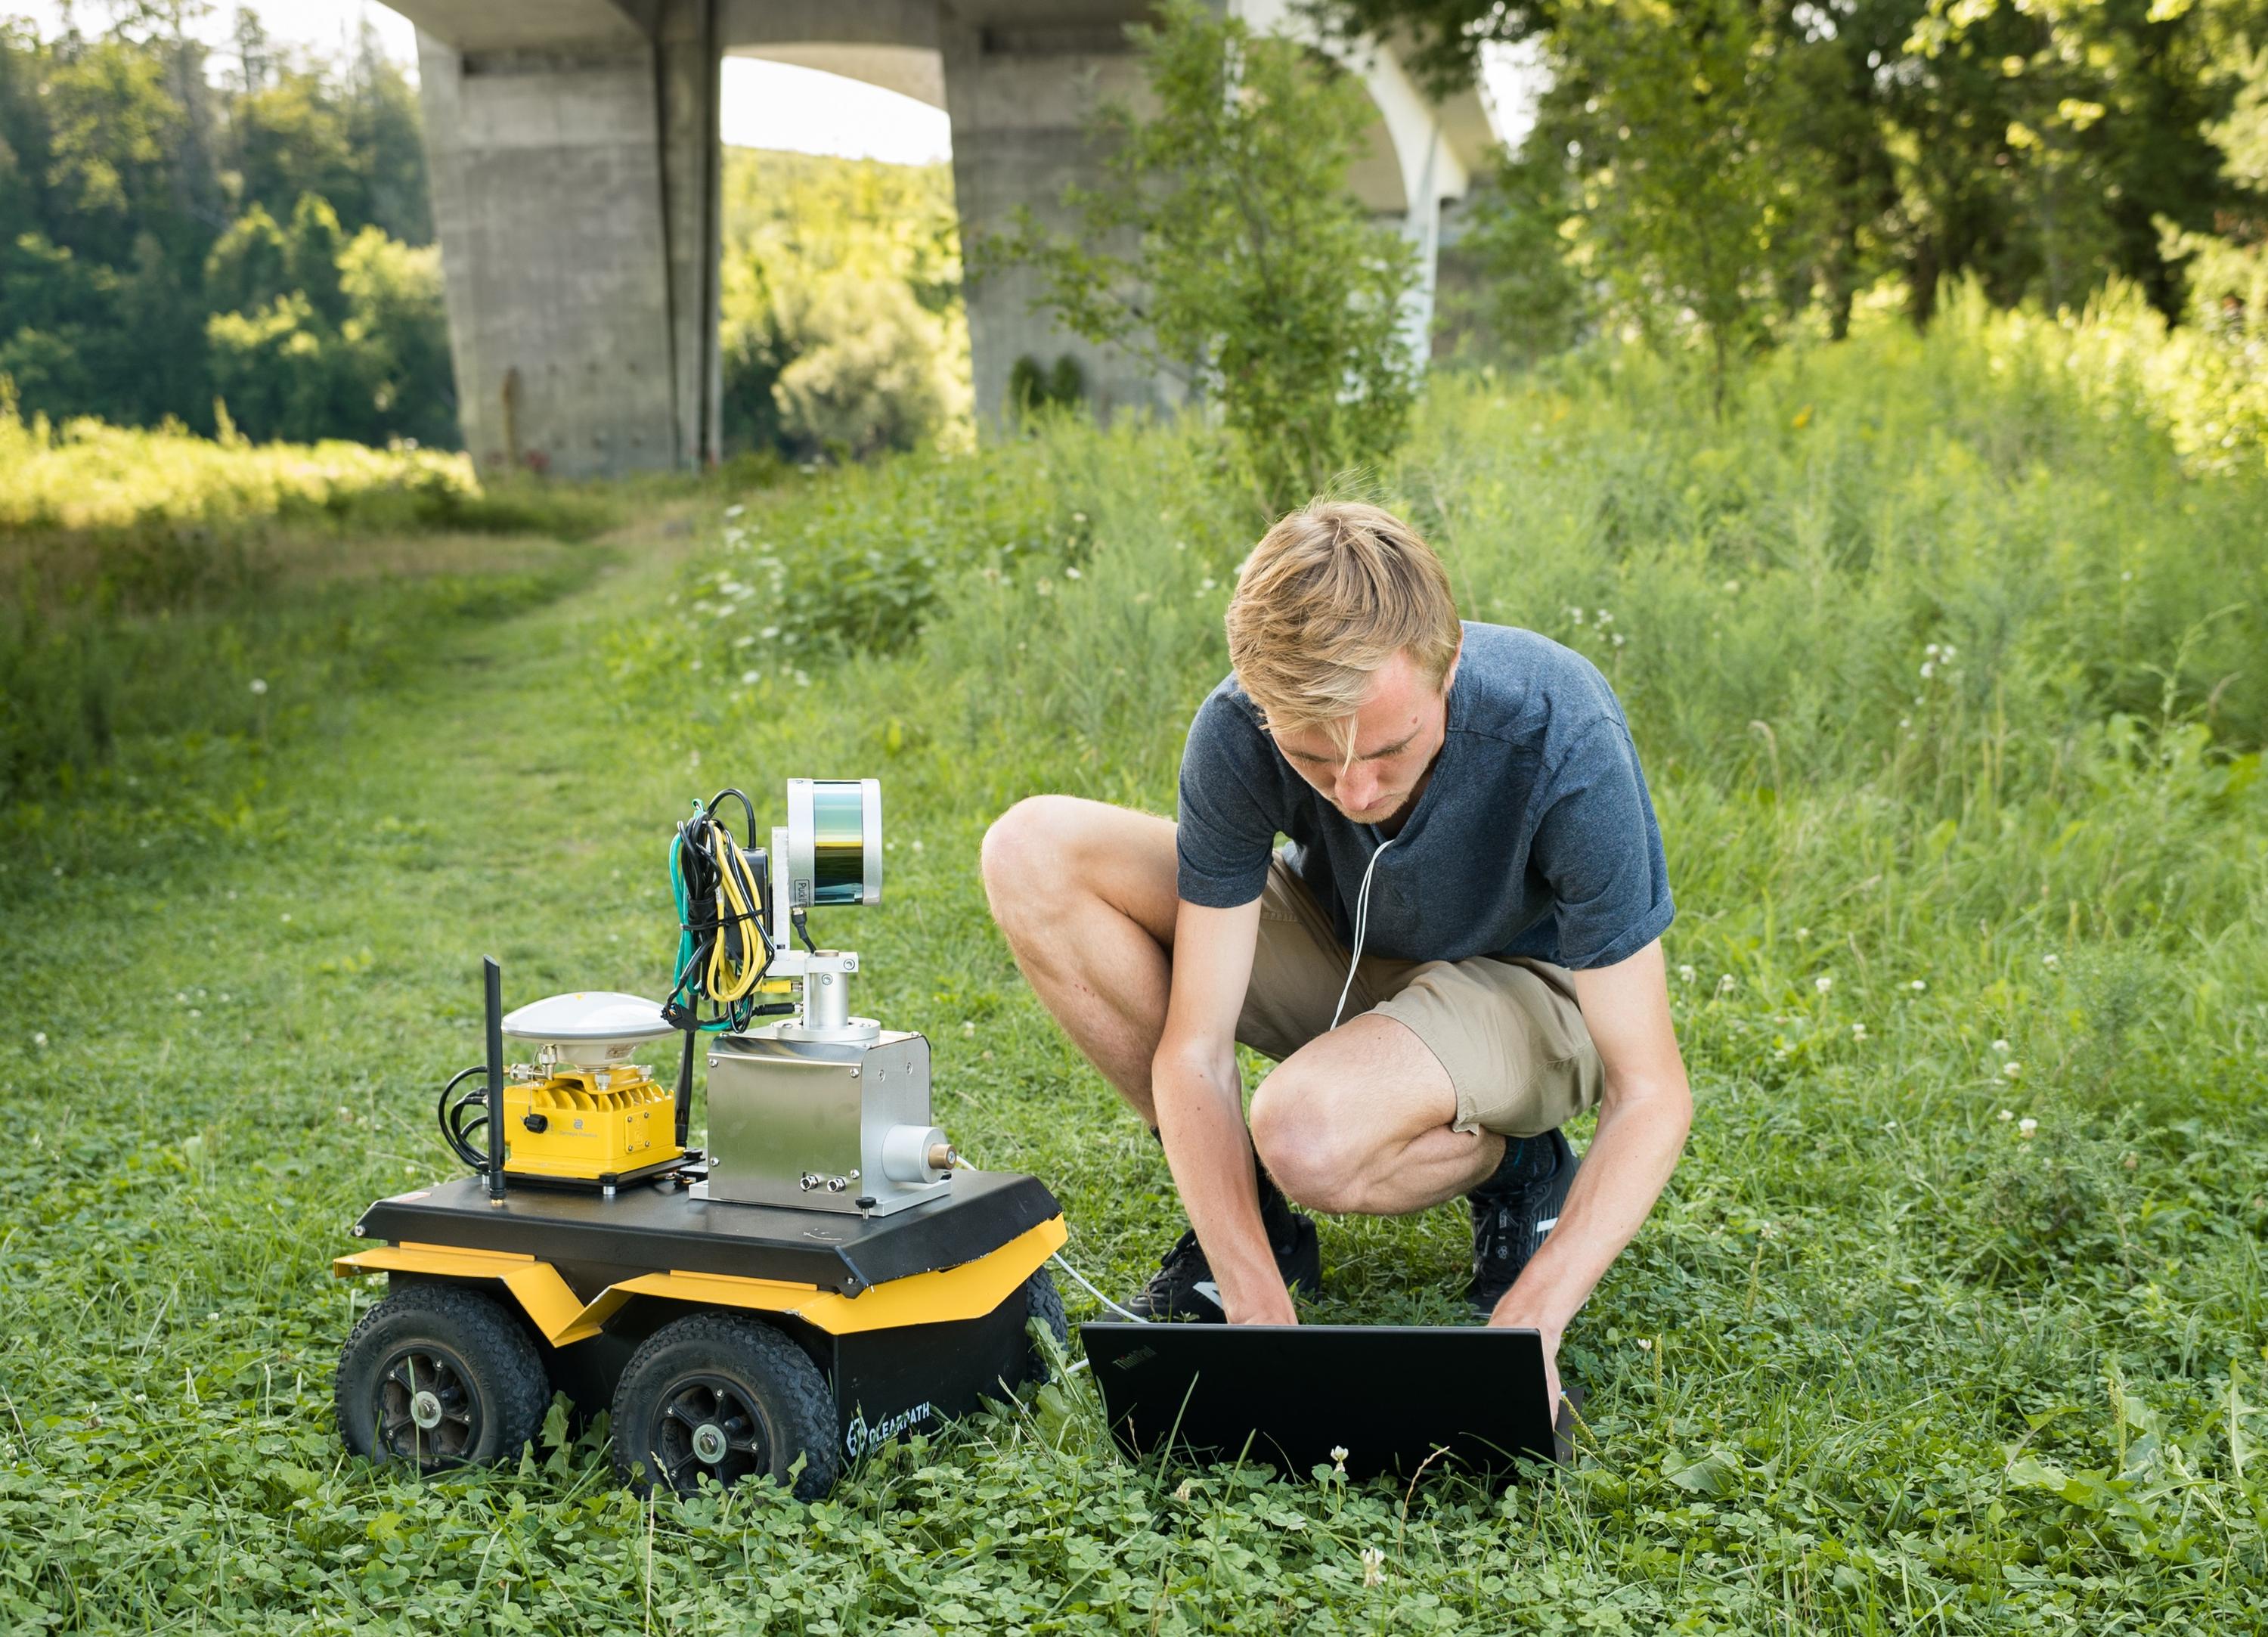 Stephen Phillips, a PhD student at the University of Waterloo, works with a robotic ground vehicle used in research on automating bridge inspections.